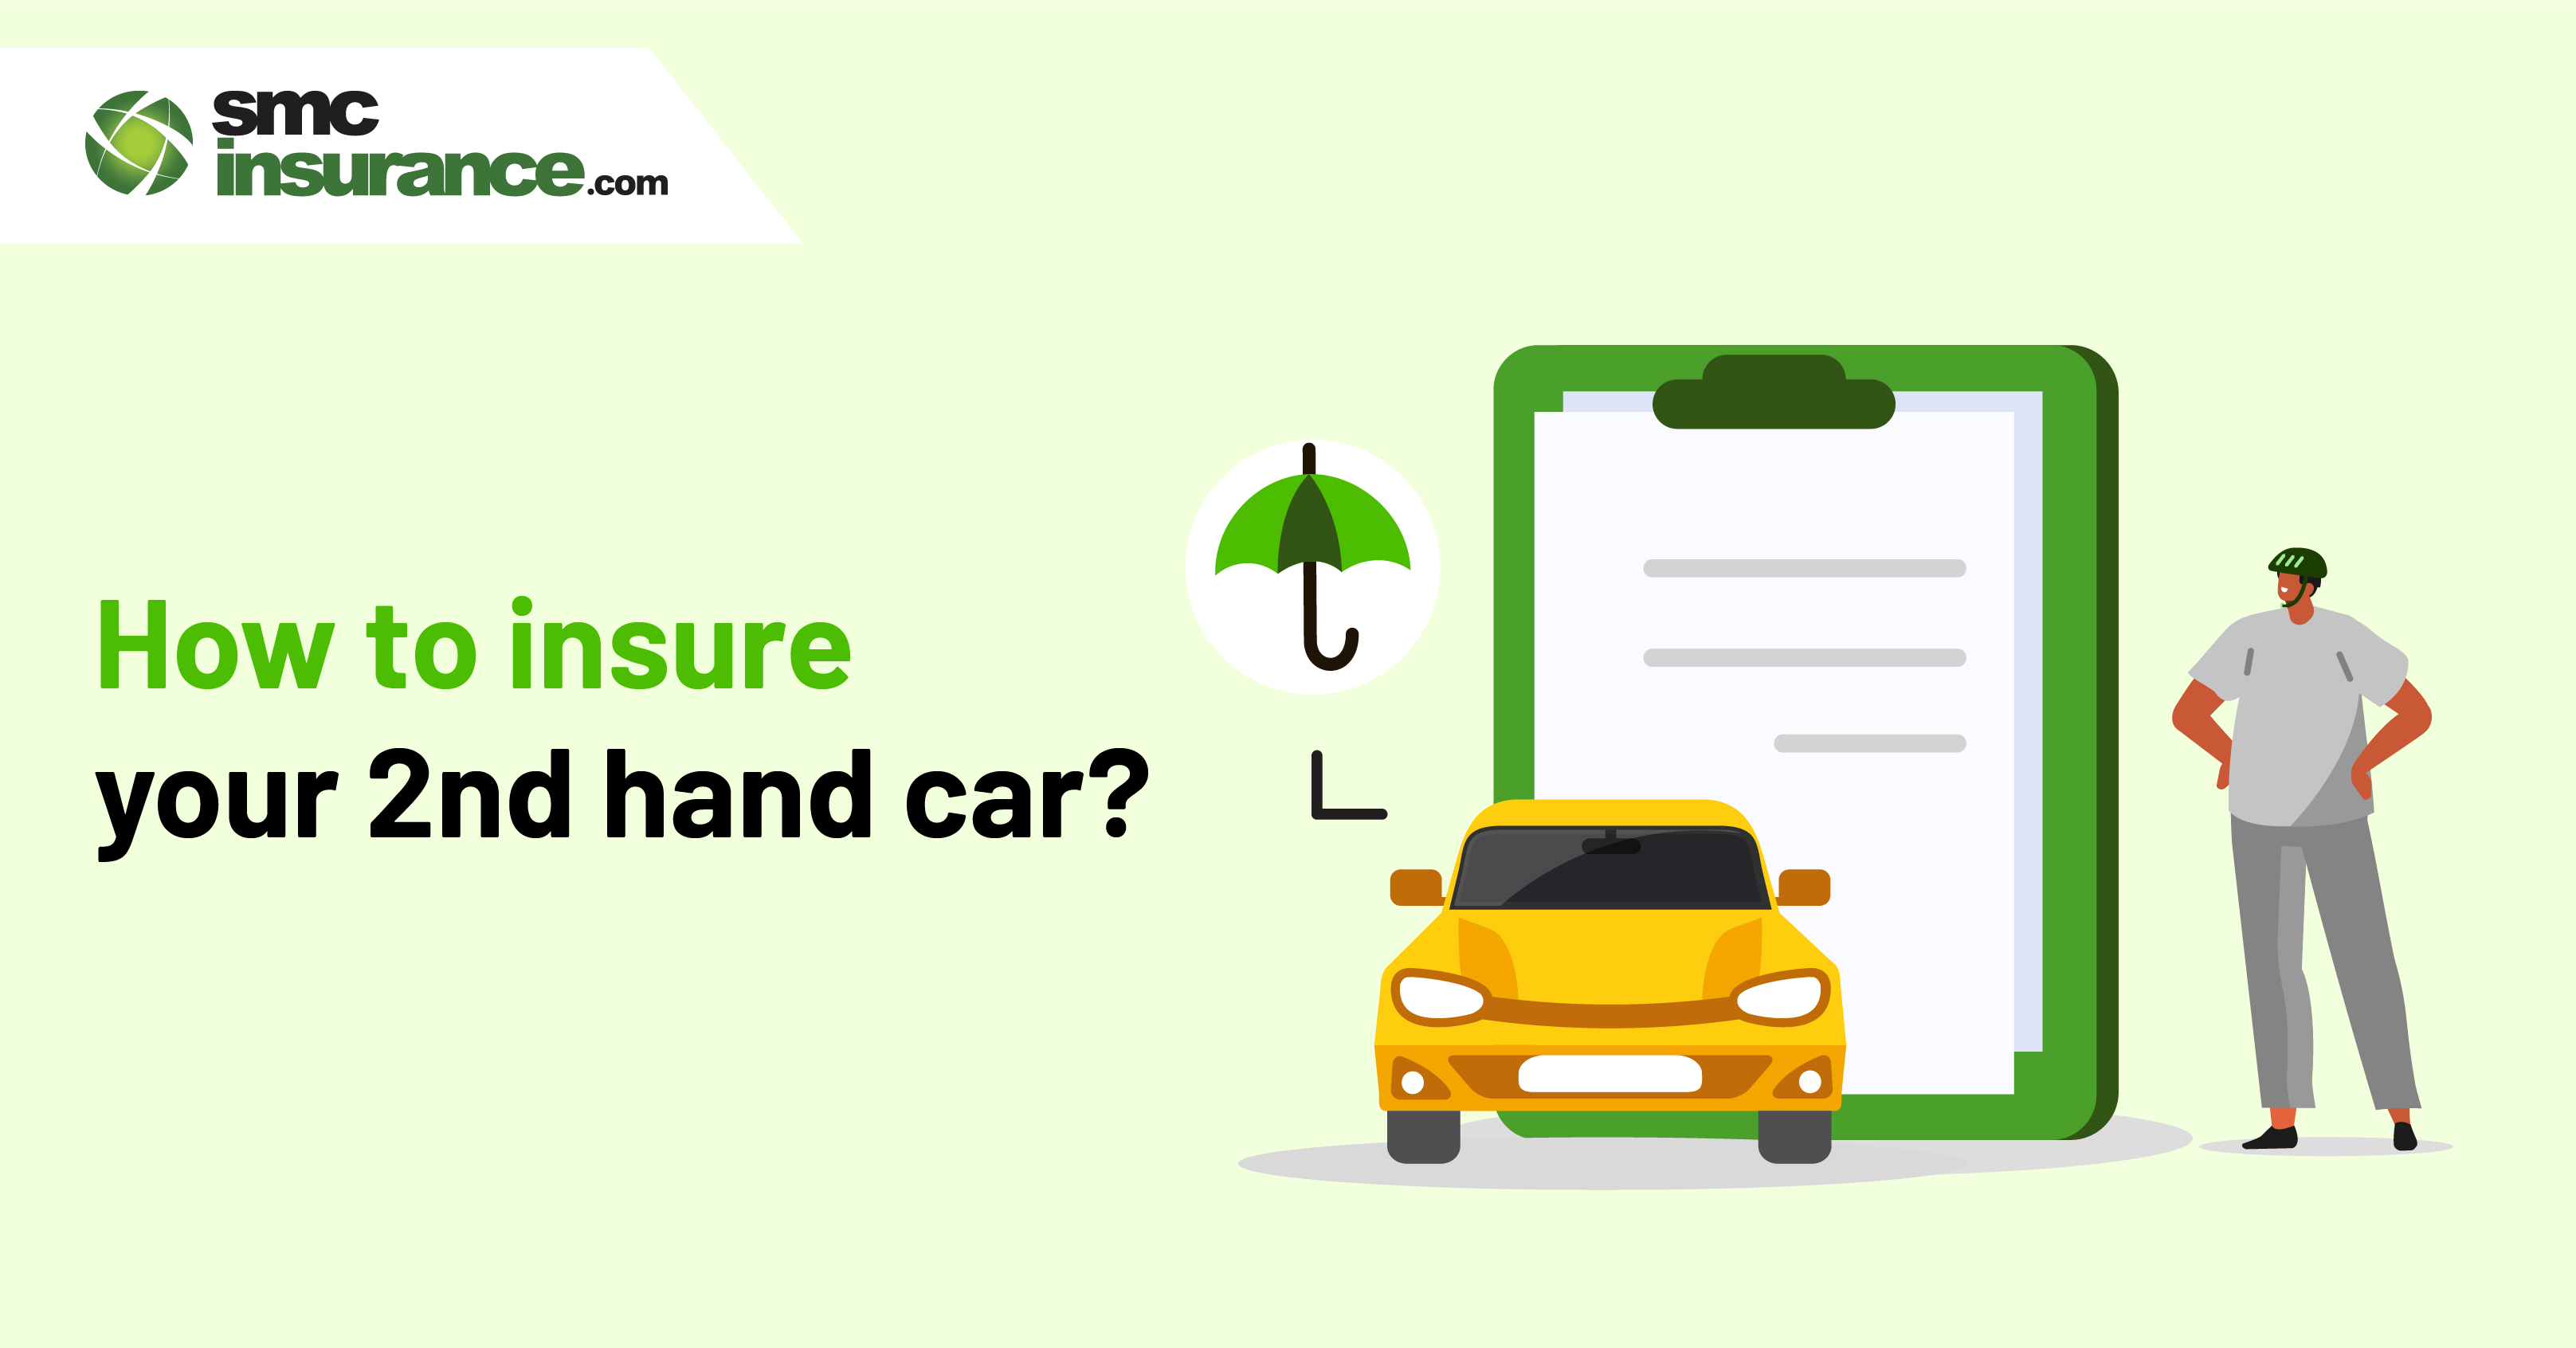 How to Insure Your 2nd Hand Car